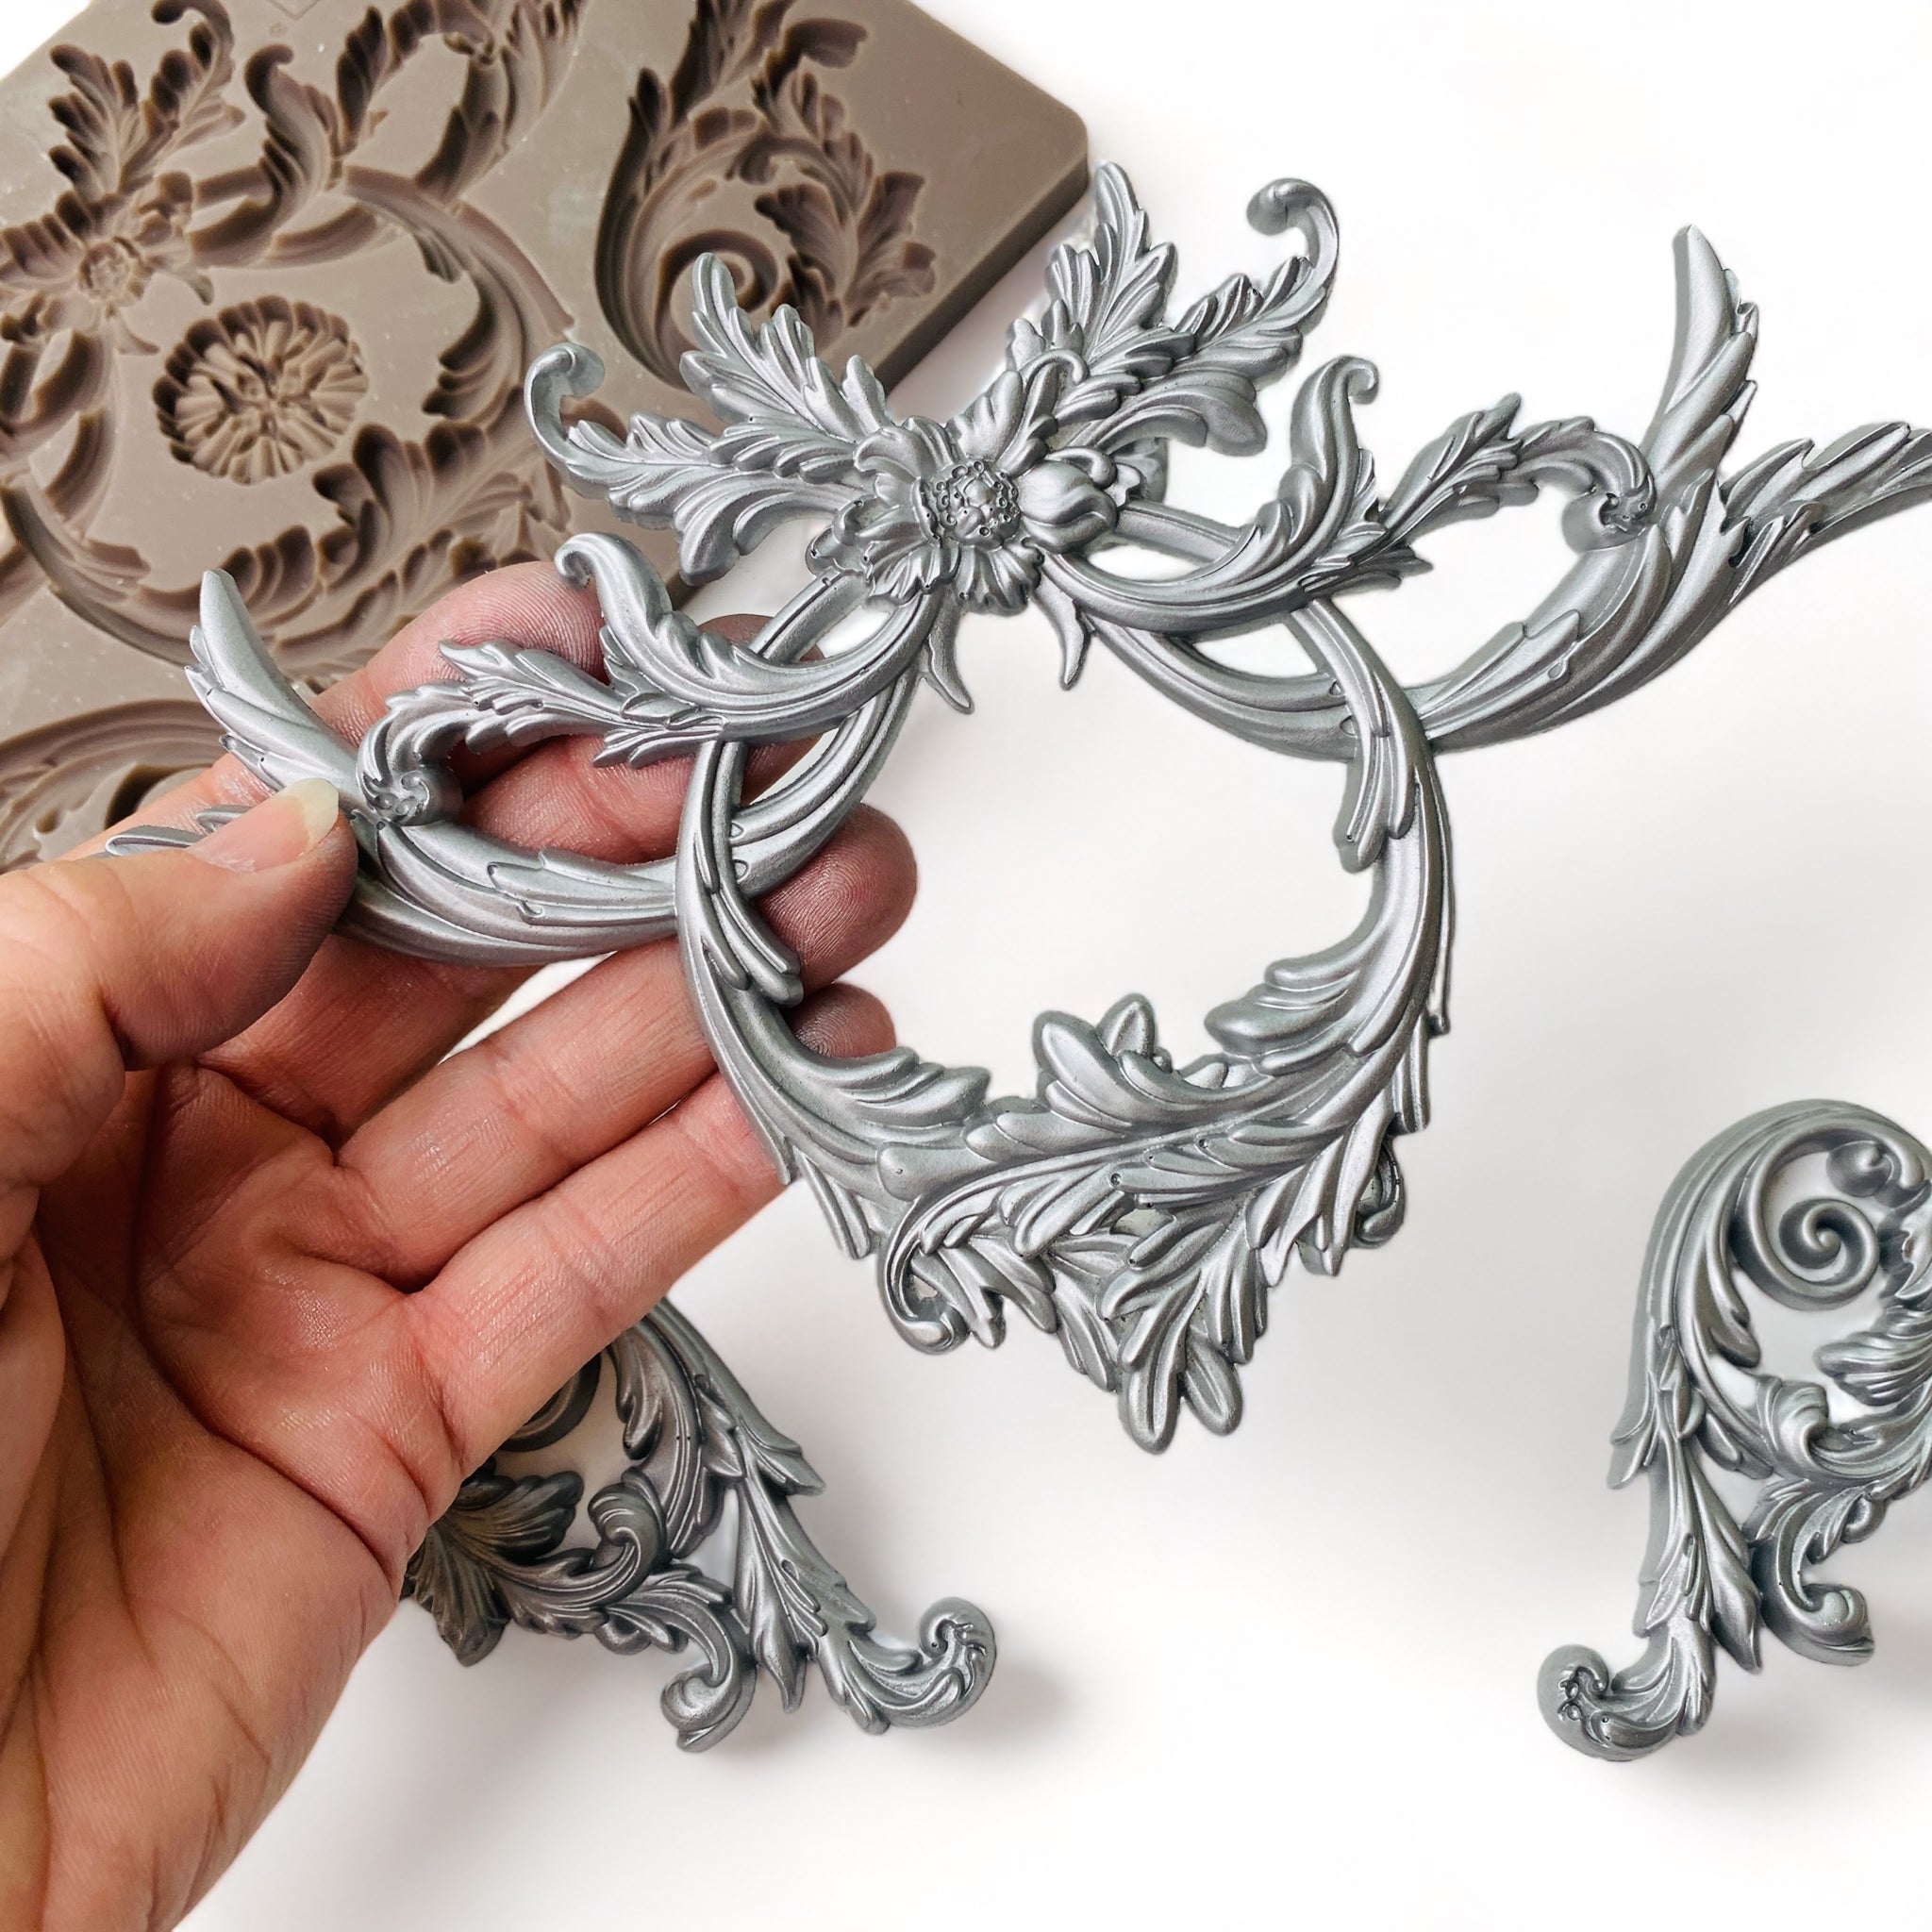 A brown silicone mold and a hand holding a medallion piece of silver colored castings of ornate scrolling accent pieces and a medallion are against a white background.